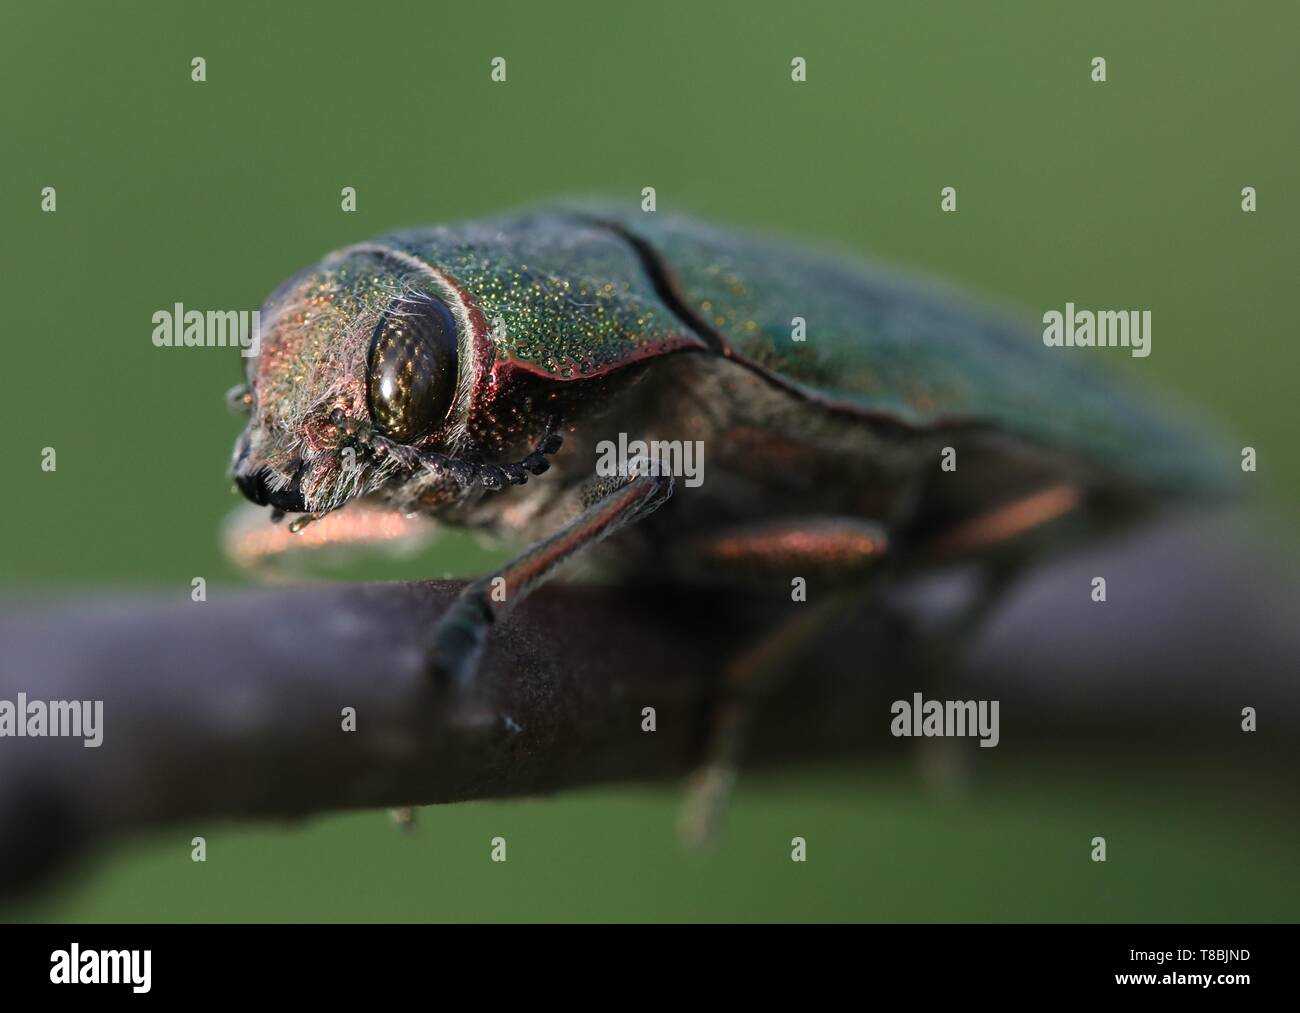 A green beetle named Perotis Chlorana walking on a tree branch in early morning light. Stock Photo